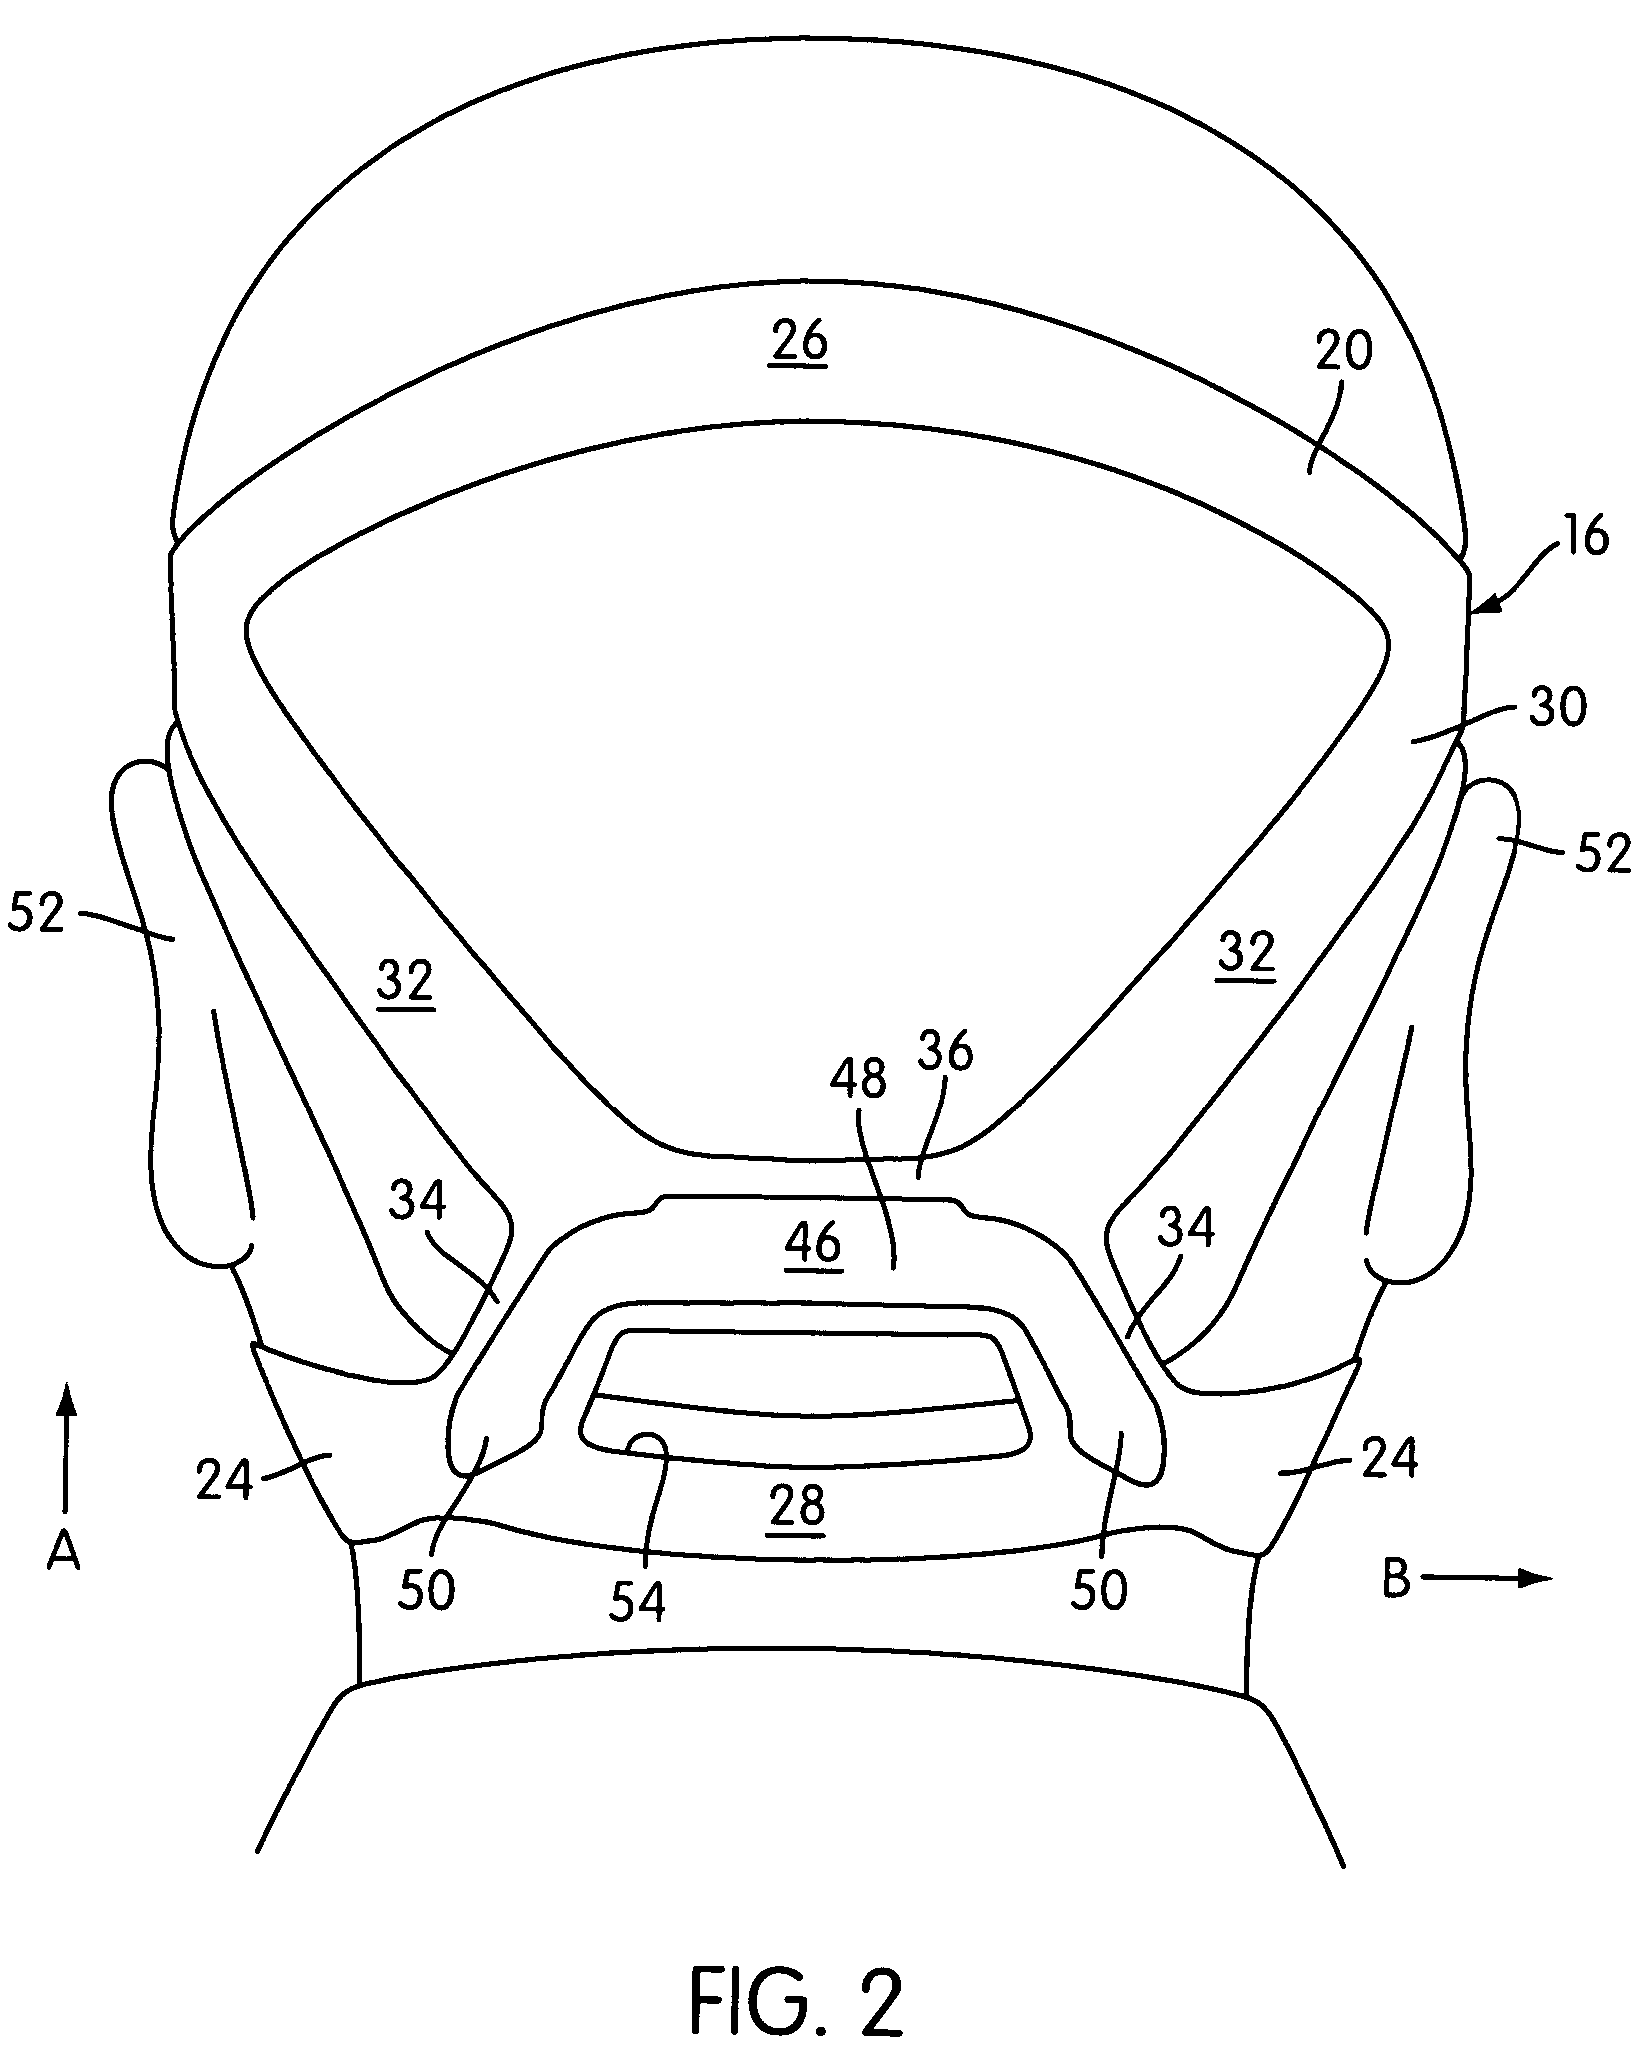 Headgear assembly for a respiratory mask assembly